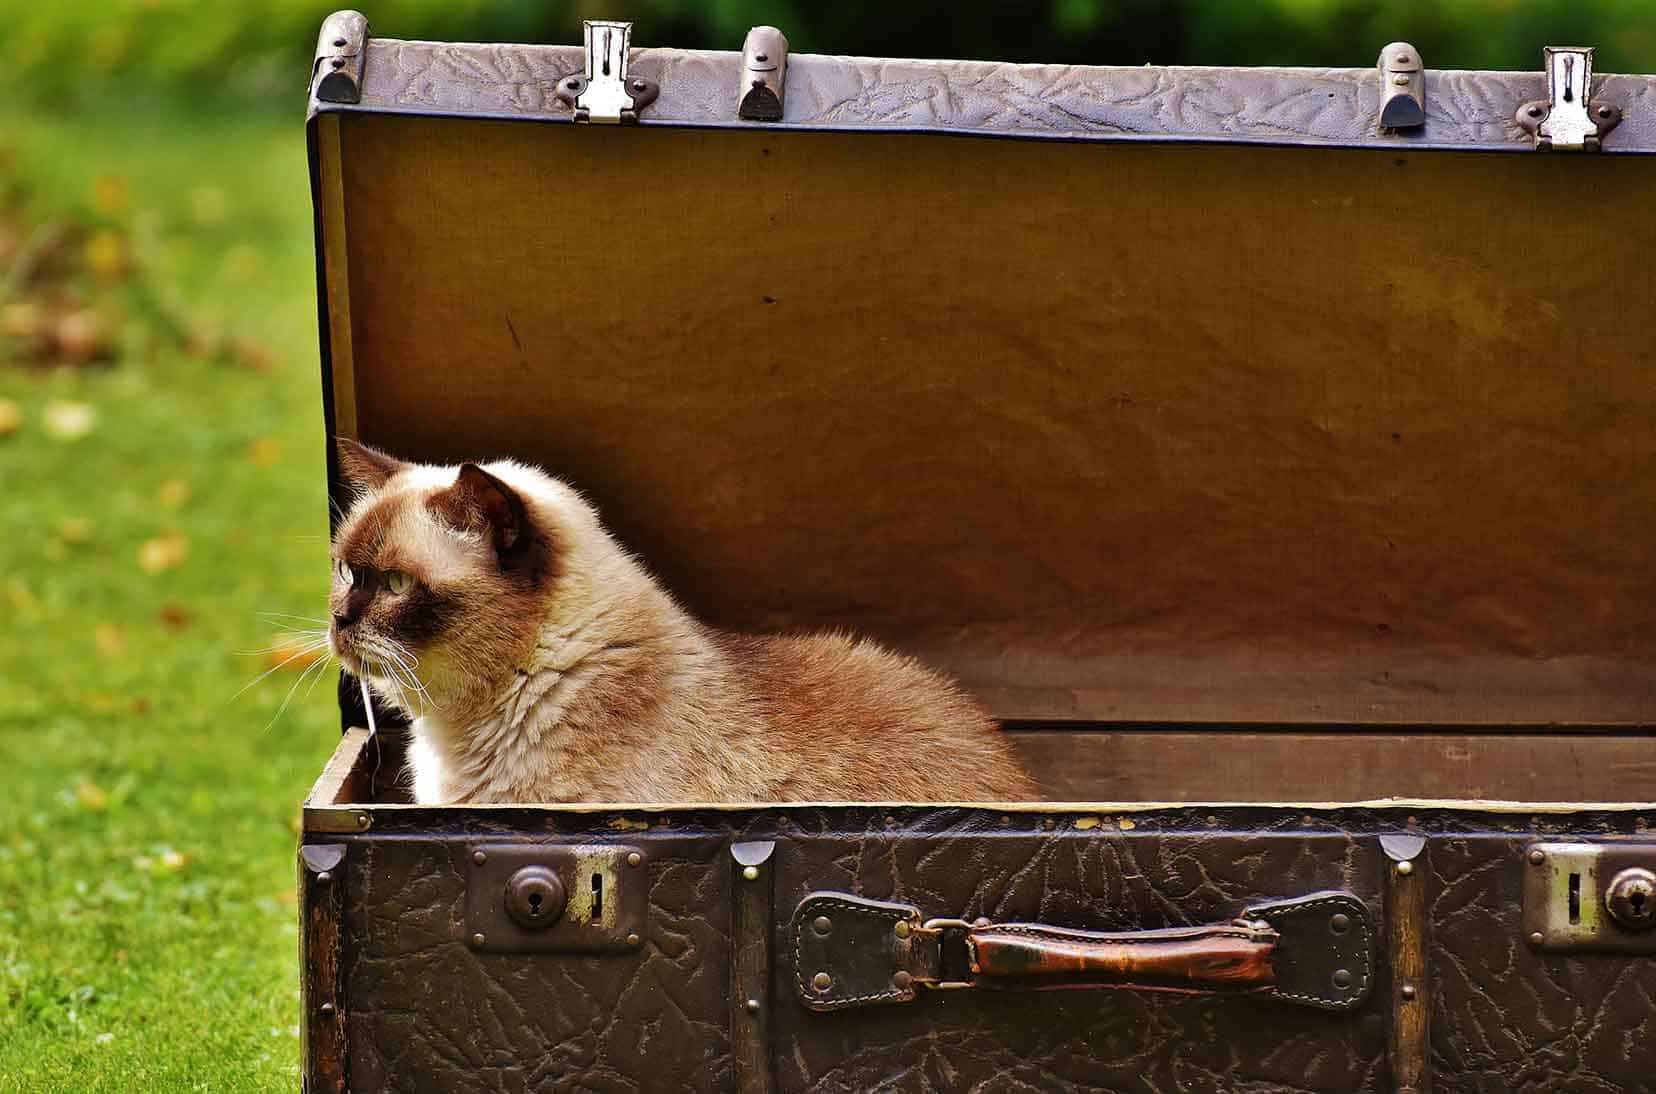 Travel with a Cat